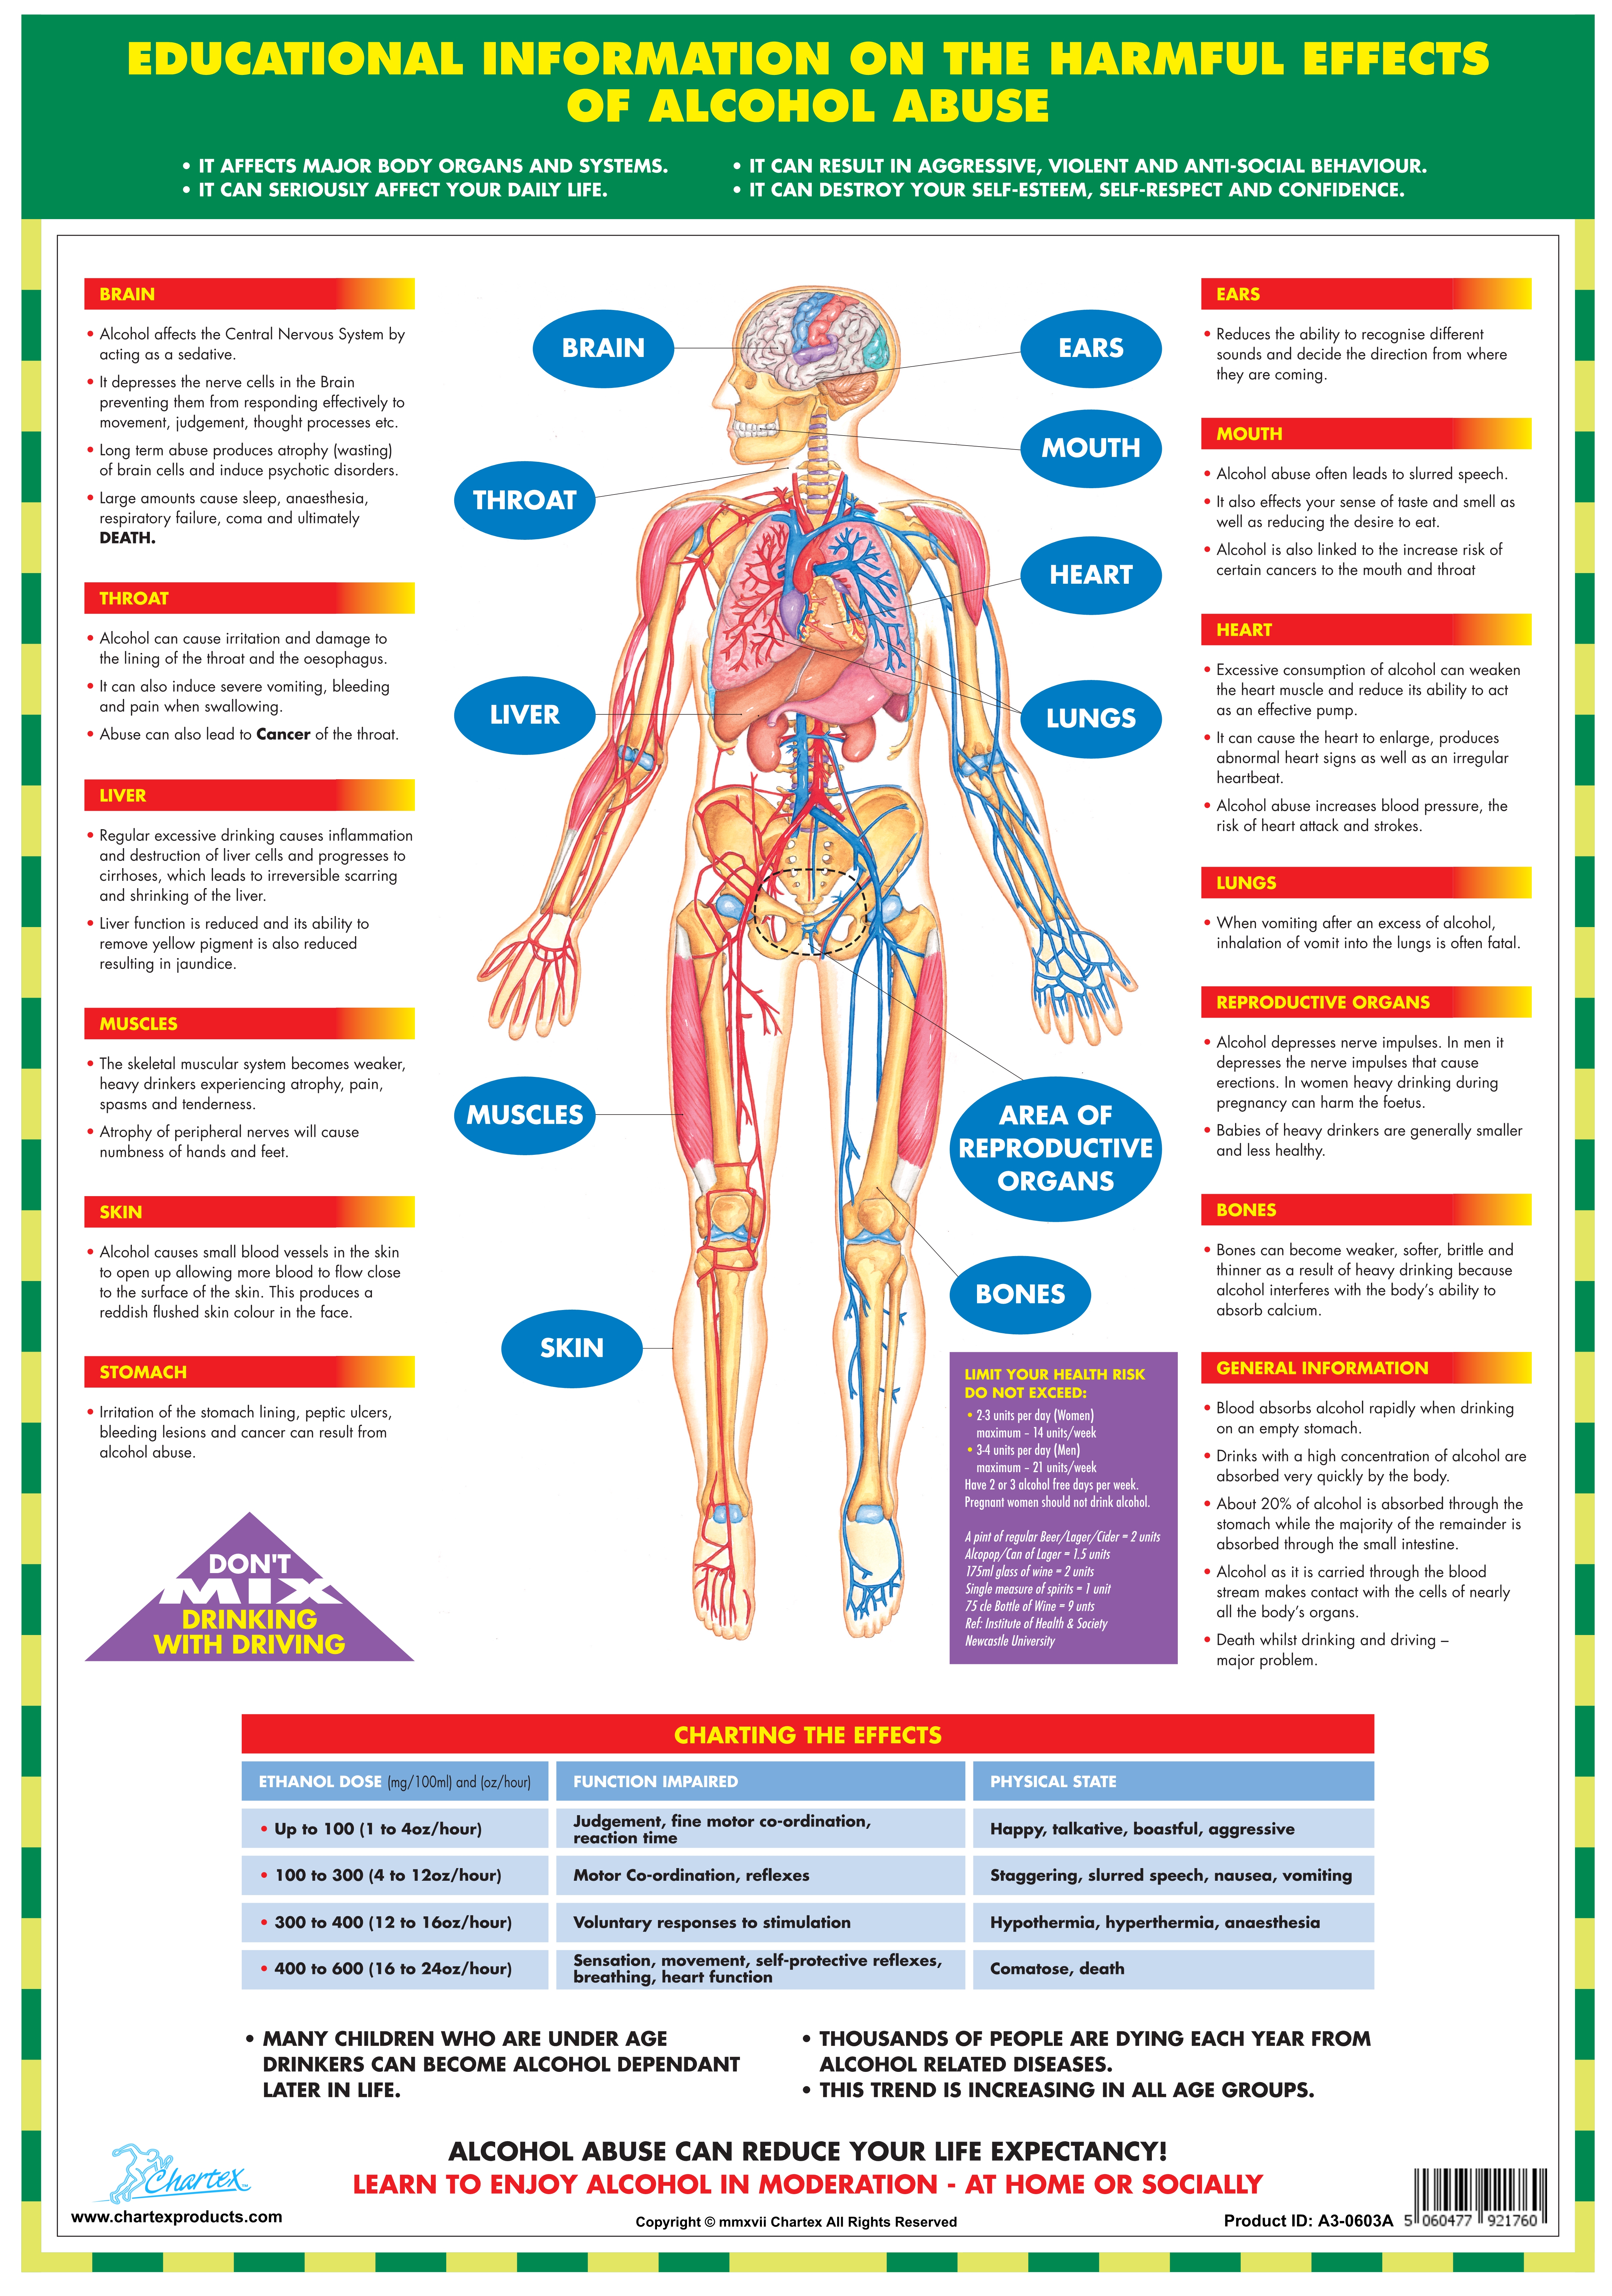 Effects of Alcohol Abuse - A3 Chart